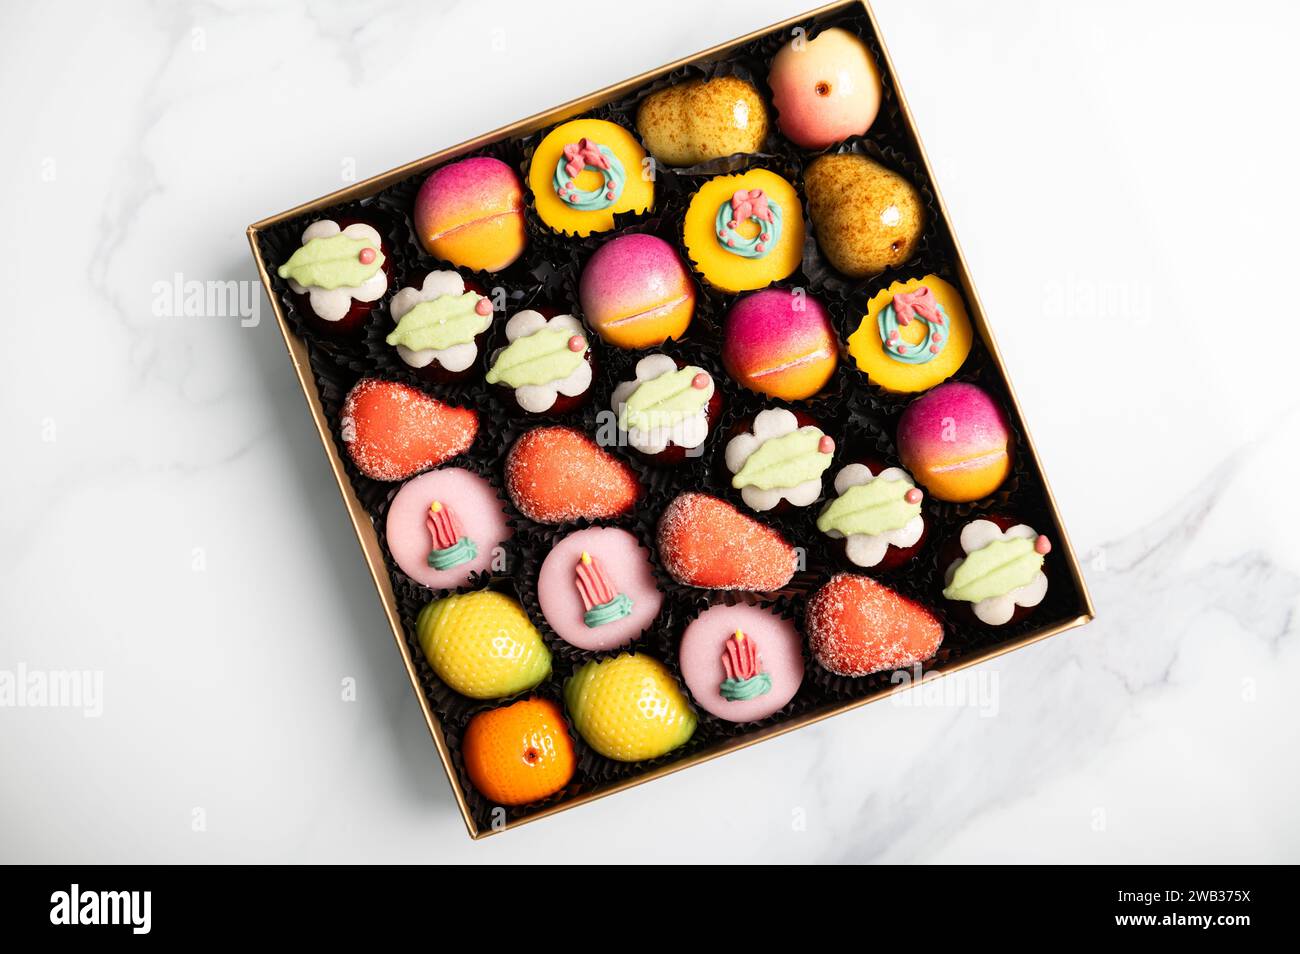 Marzipan sweets as fruits Stock Photo